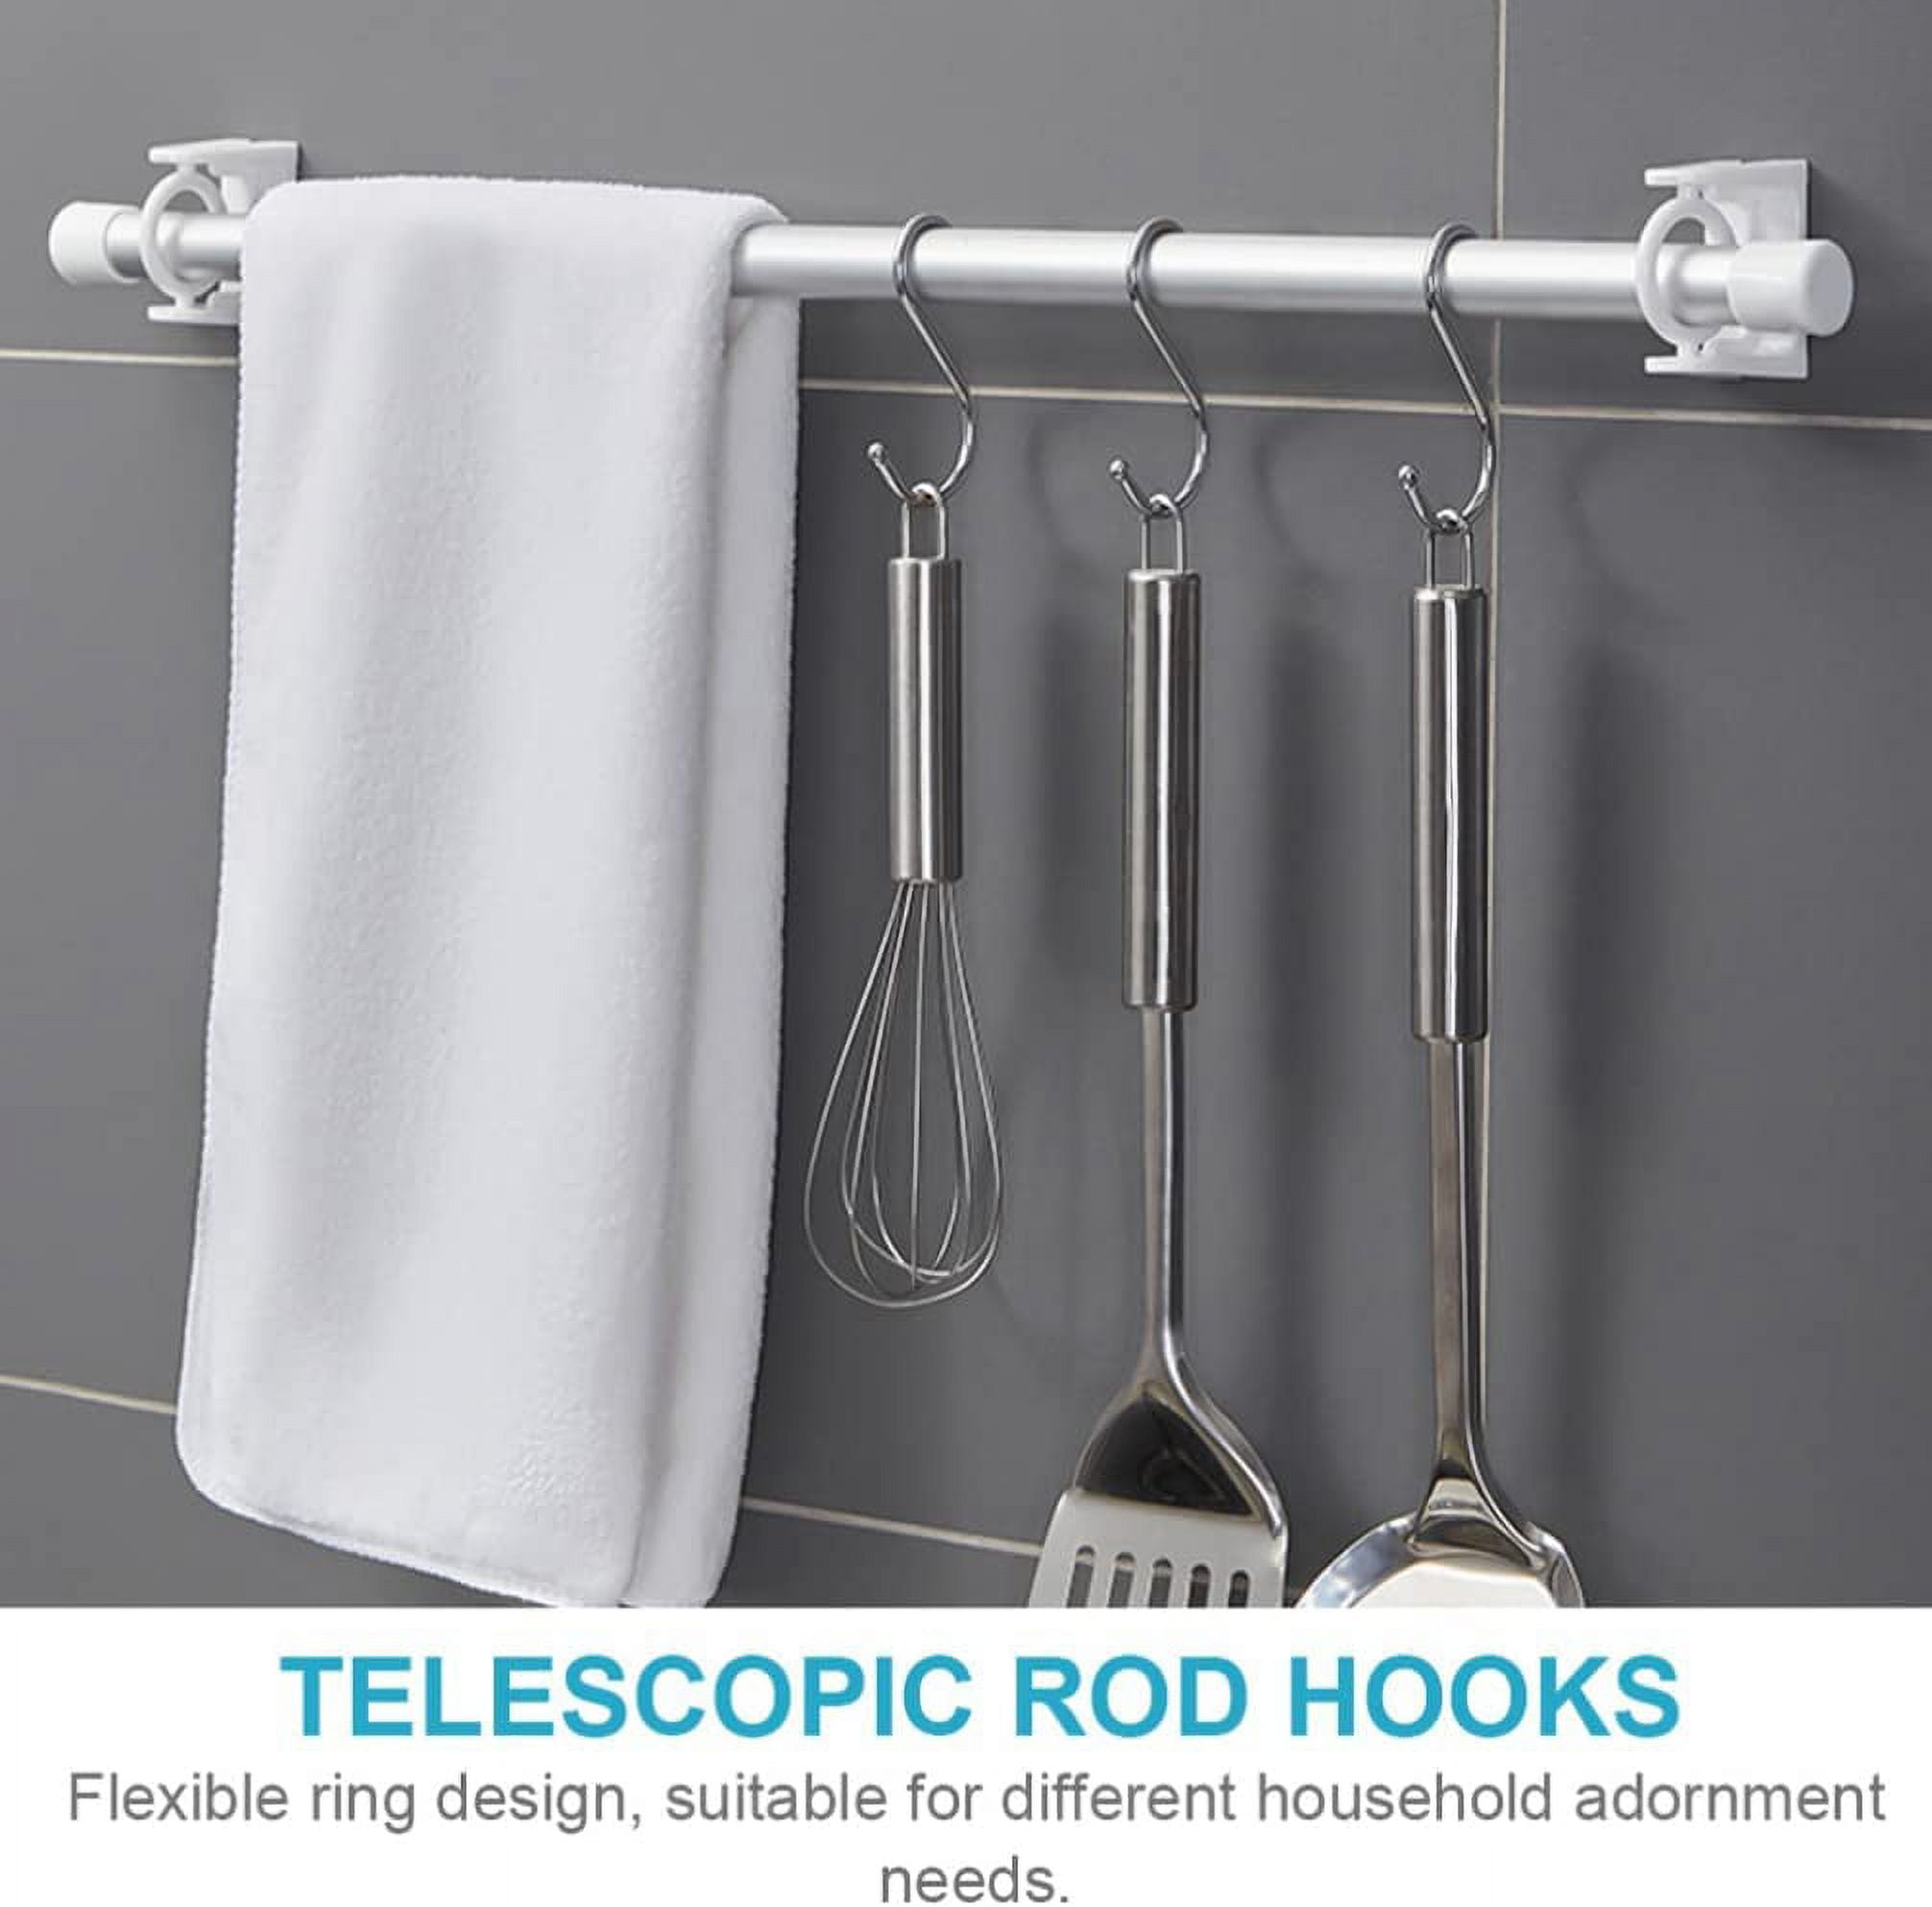 Brand: AdhesiveEase Type: Self Adhesive Hooks Specs: Strong, Door/Wall  Hook, Towel Bar, Shower Curtain Rod Rack Key Points: Fixed Hanging Clip  Features: No Drilling Required, Easy Installation, Holds Heavy Items  Application: Kitchen